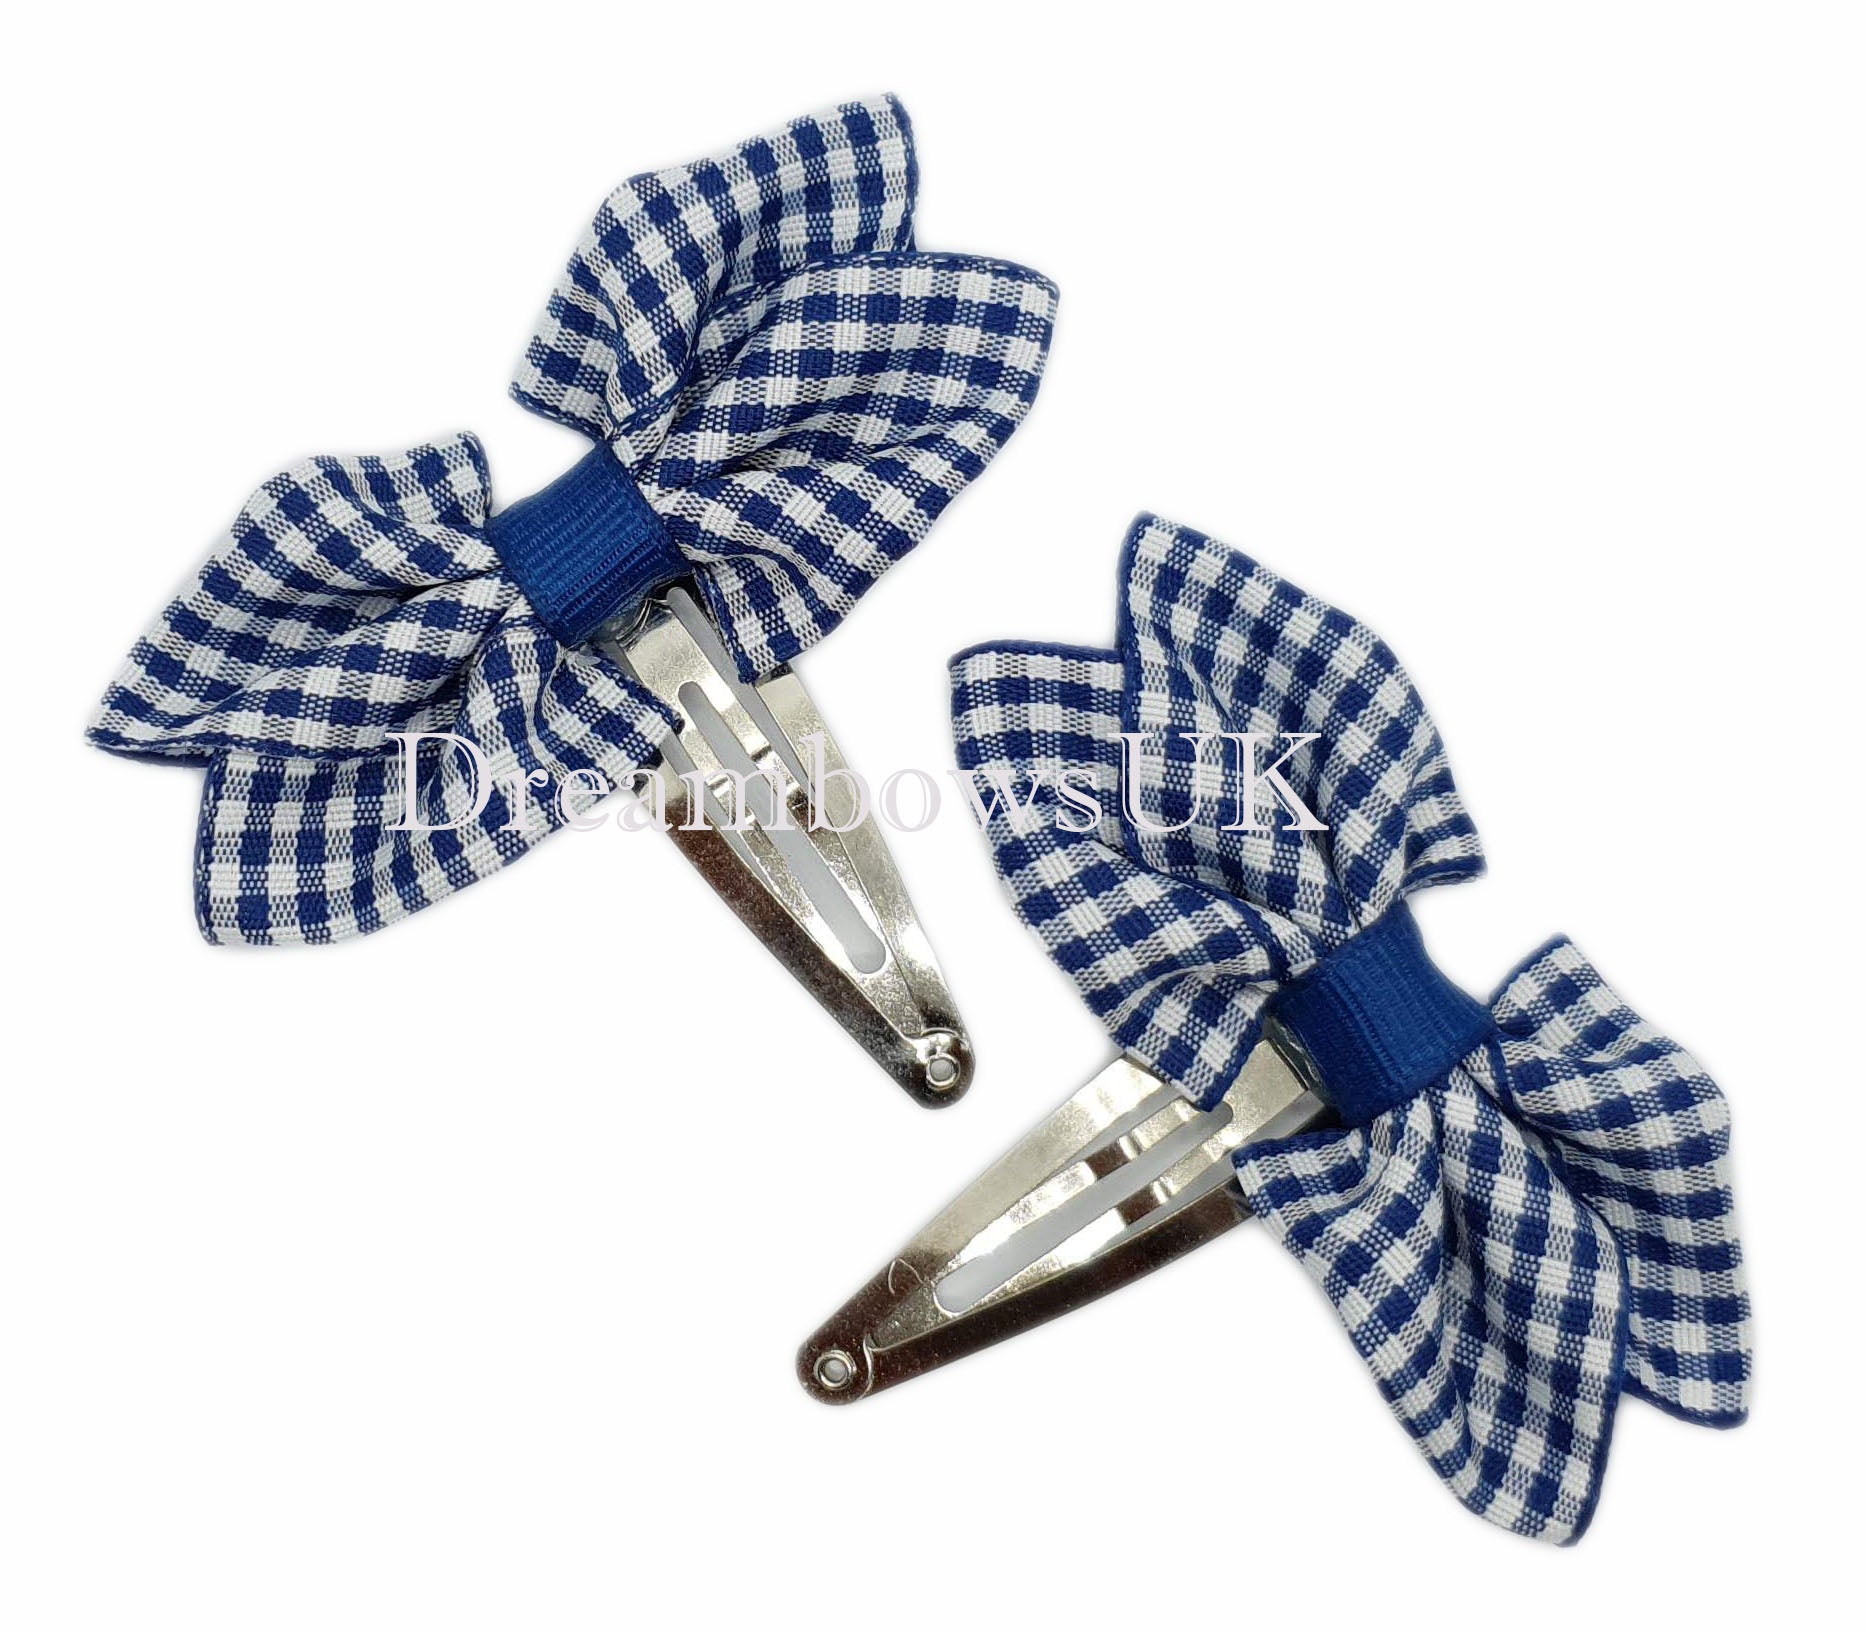 Navy blue gingham hair bows on snap clips